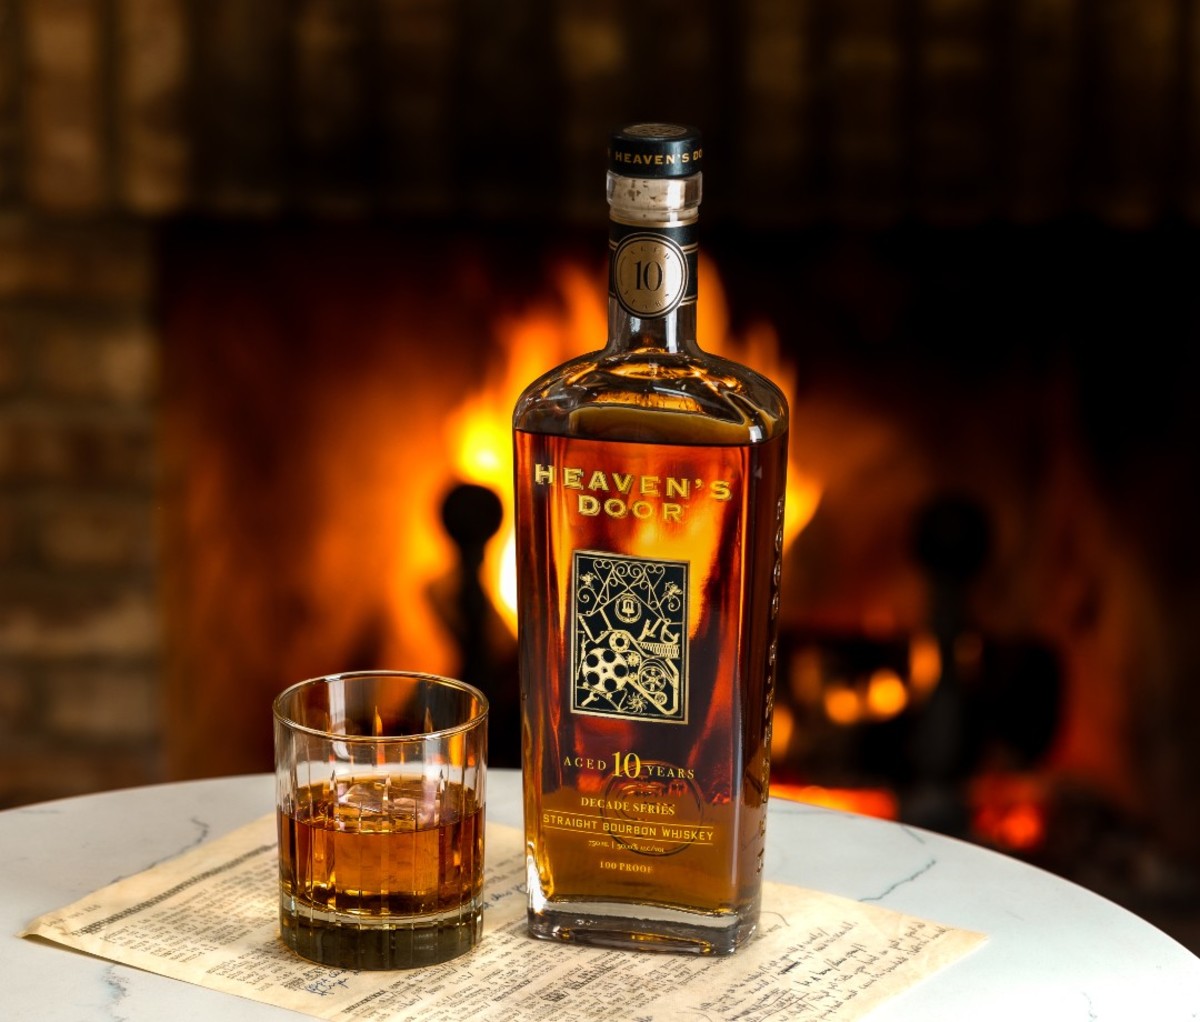 Bottle of whiskey with glass half full in front of fireplace